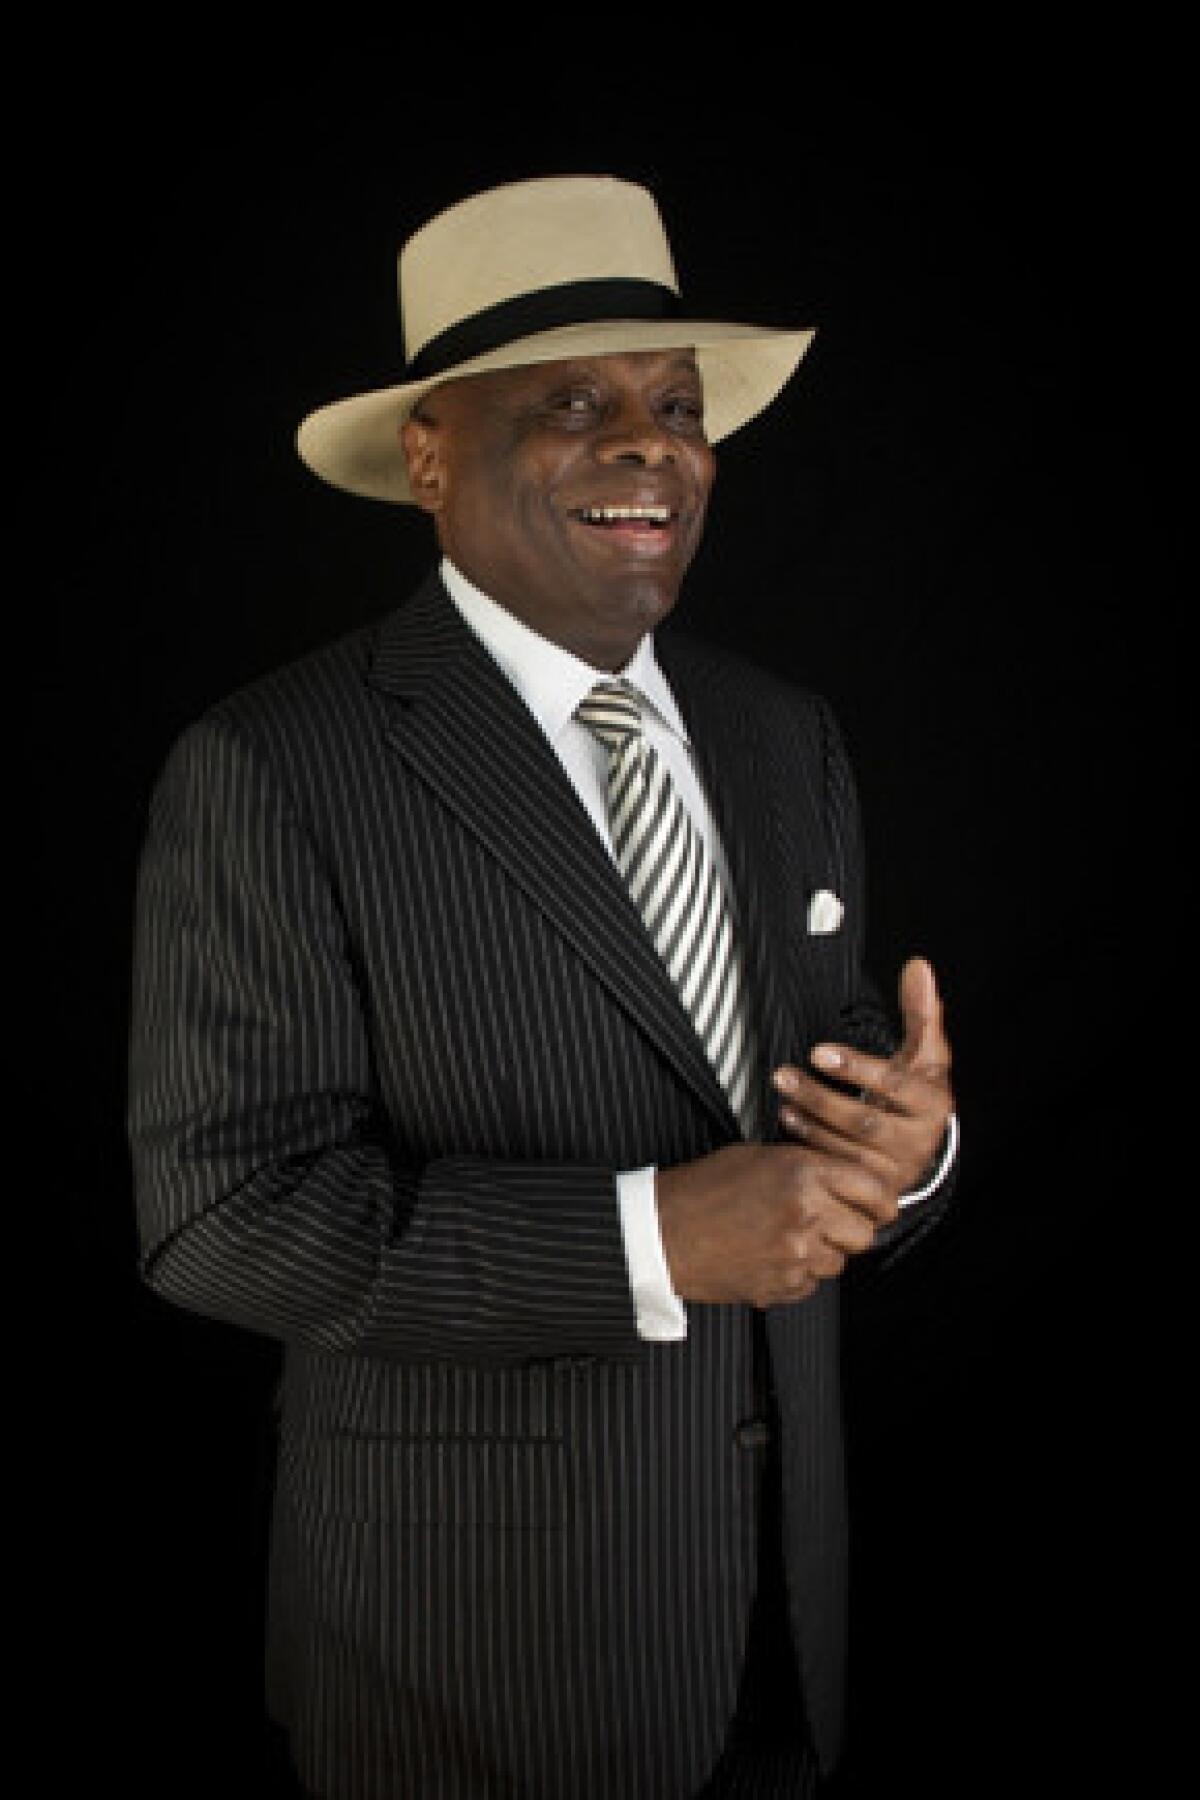 Willie Brown poses for a photo in his office at the Willie Brown Institute in San Francisco.